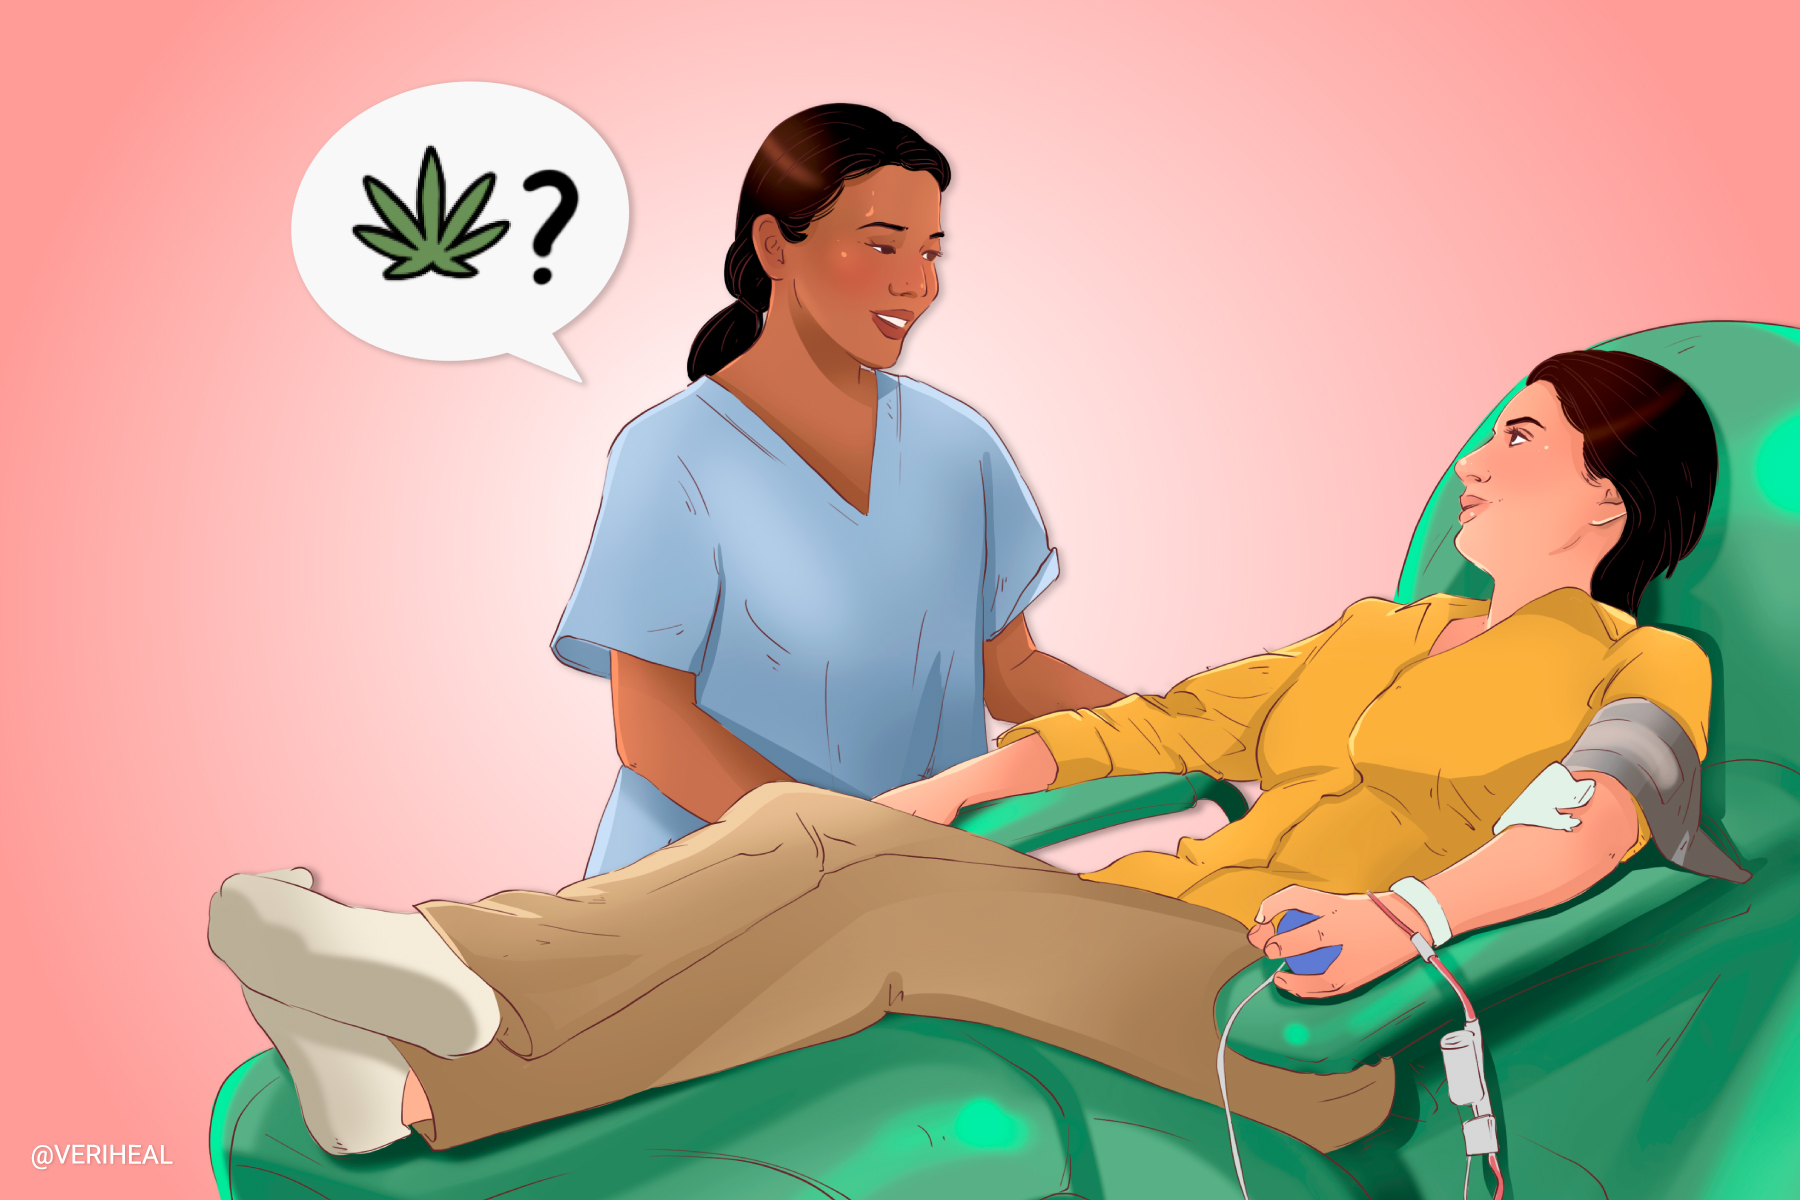 Are You Able to Donate Blood if You Are a Regular Cannabis Consumer?